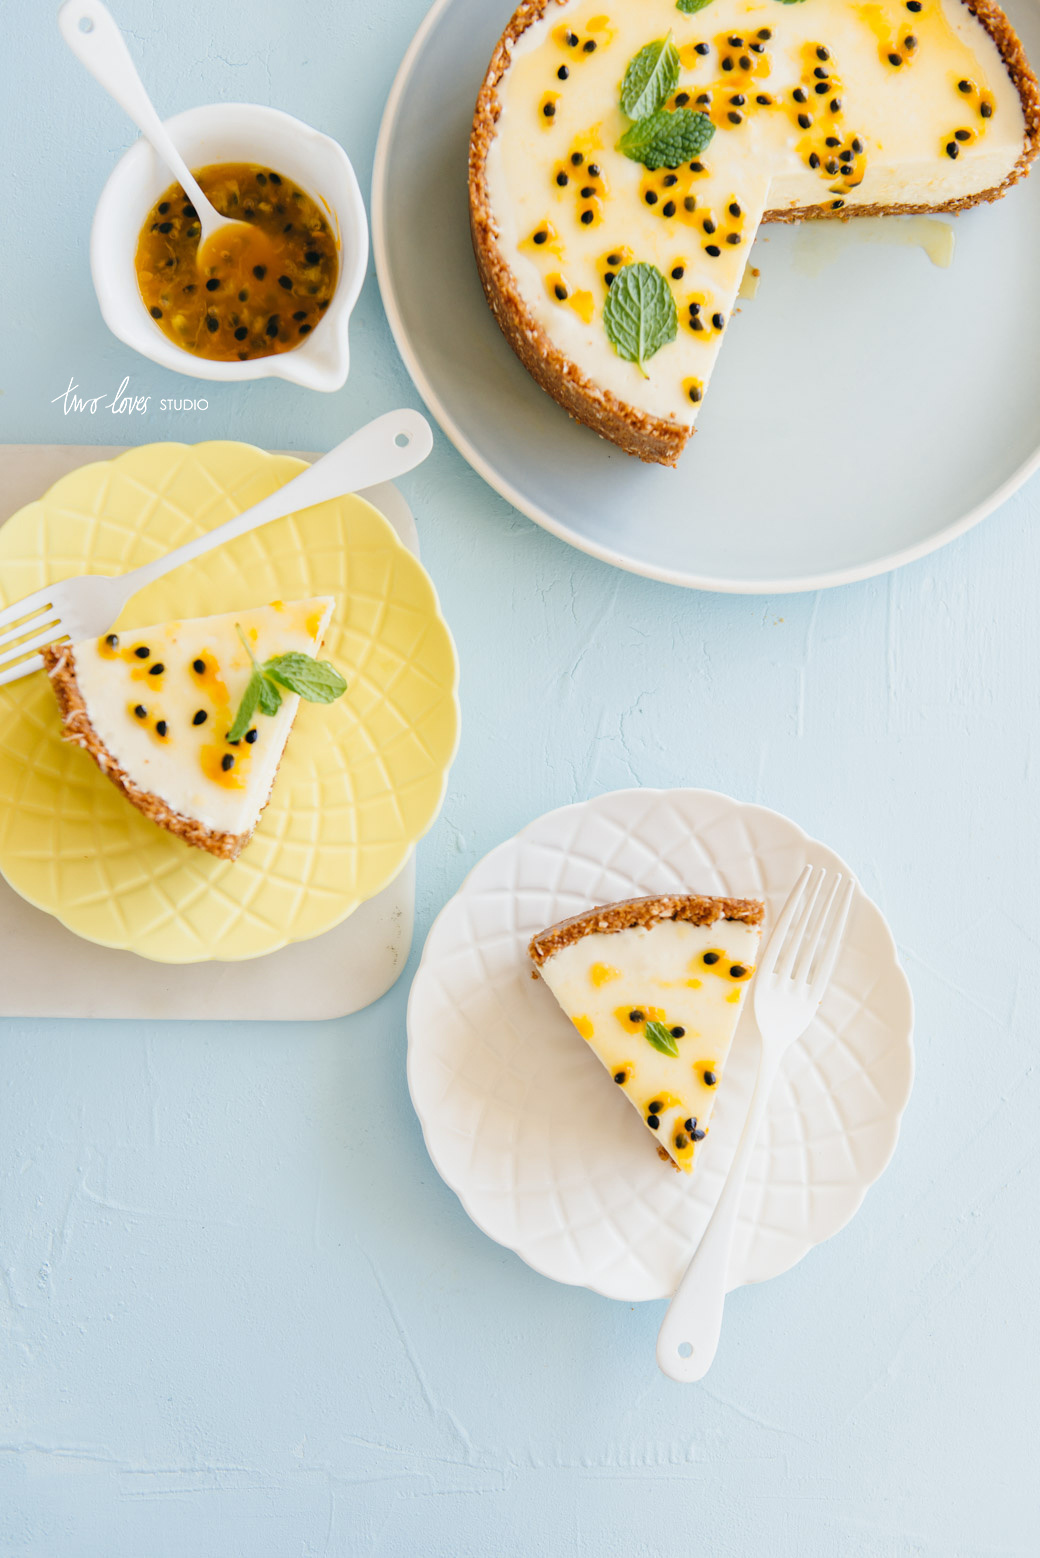 Food Photography Behind The Lens: White Chocolate + Passionfruit Cheesecake